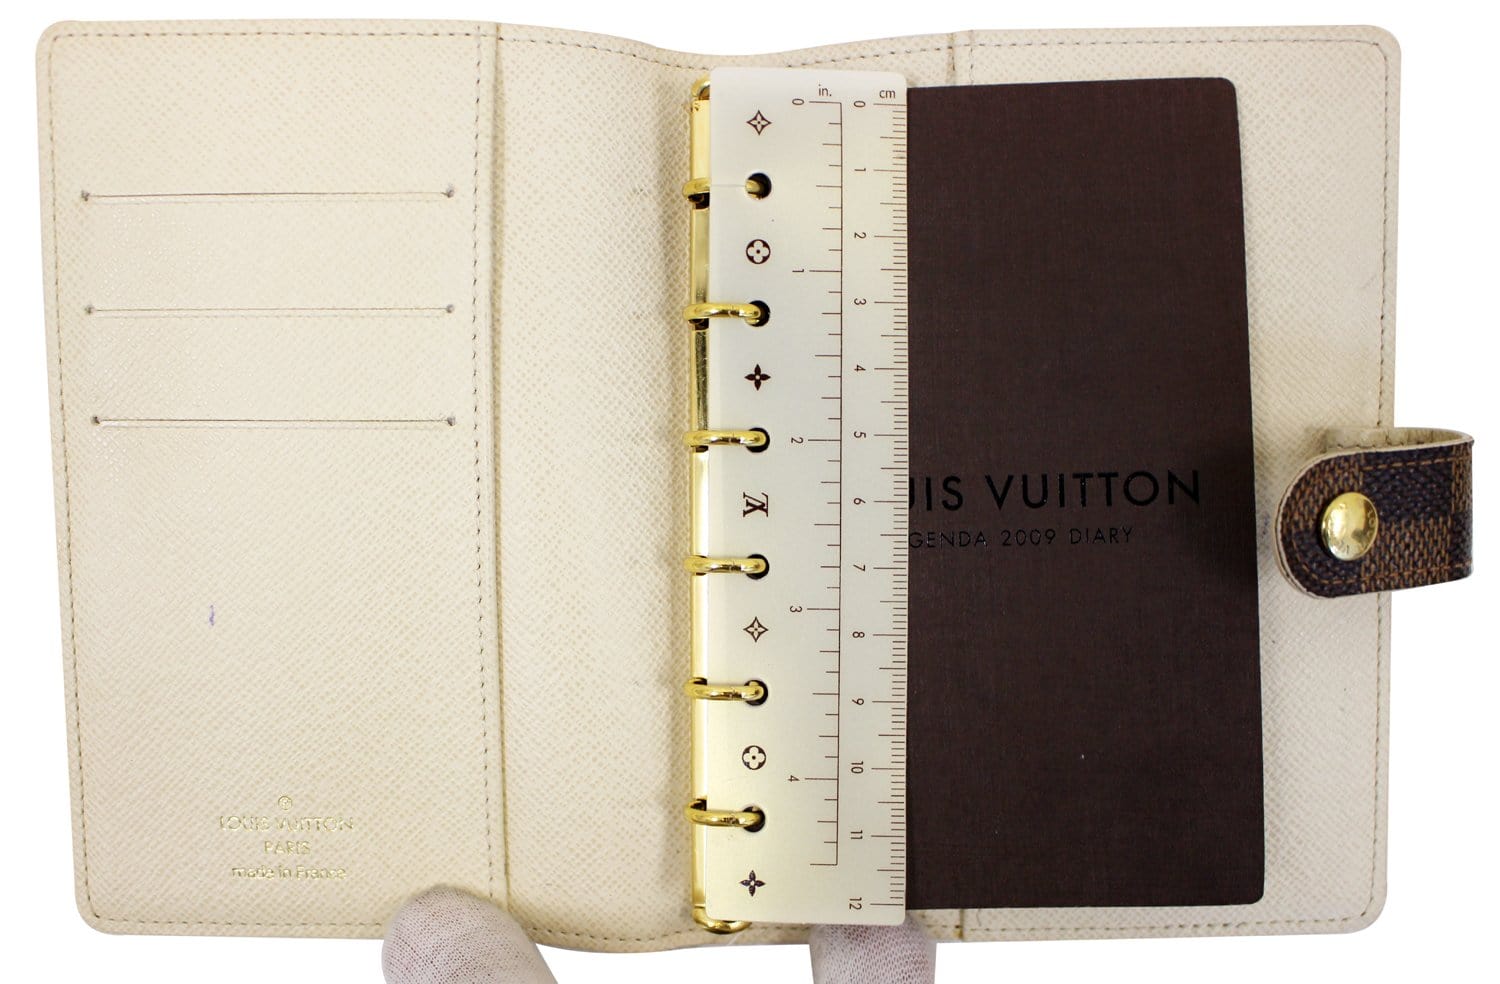 Sold at Auction: AUTHENTIC LOUIS VUITTON DAY PLANNER